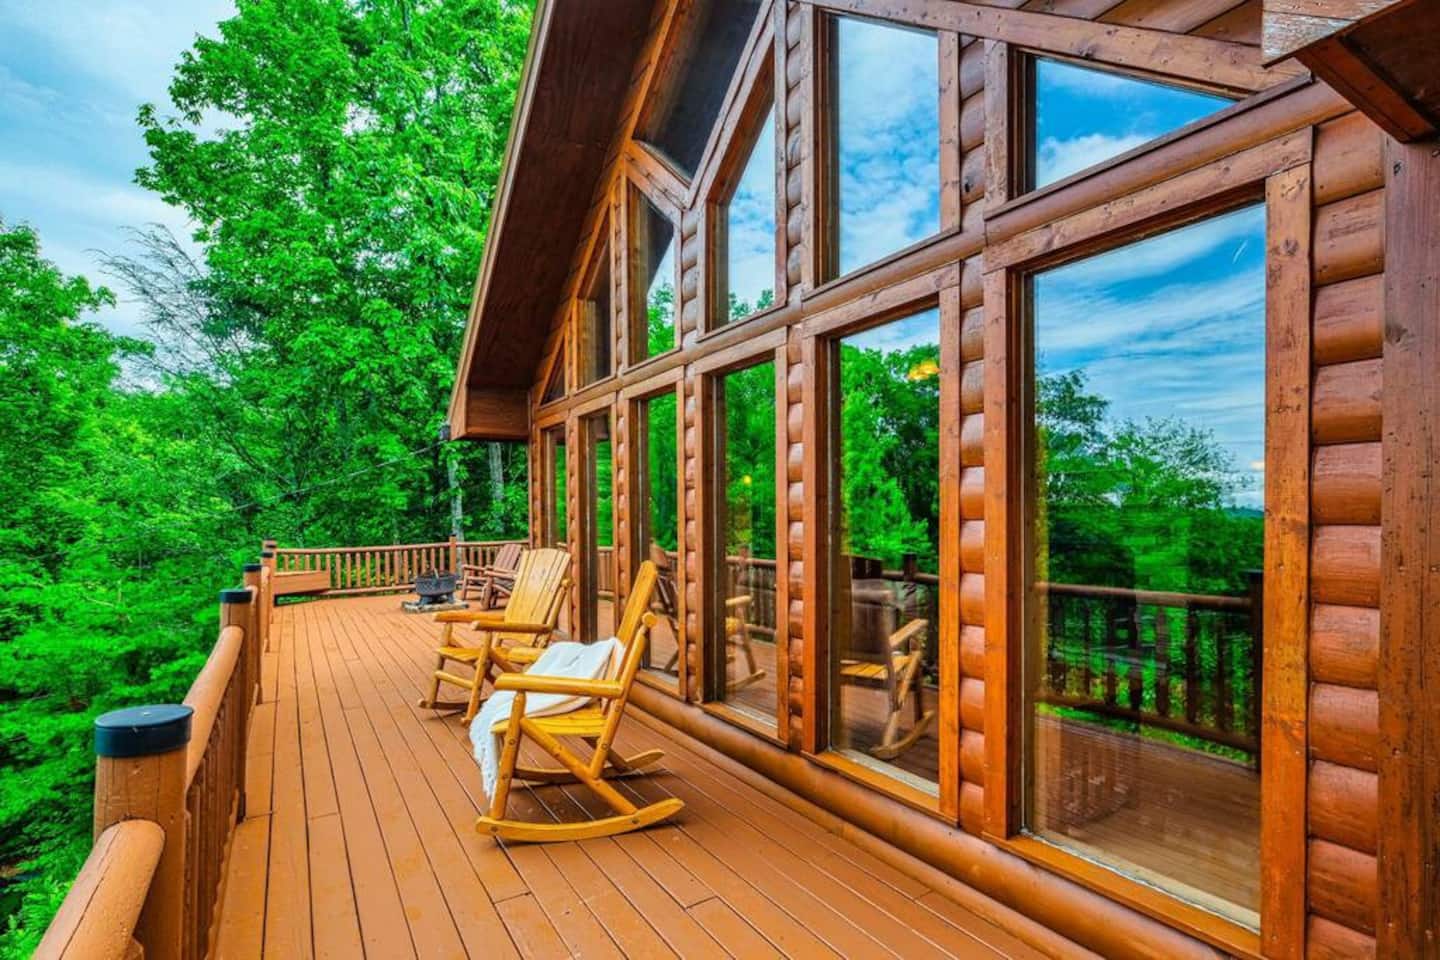 Quaint & Cozy Cabin Rental For Two in Tennessee